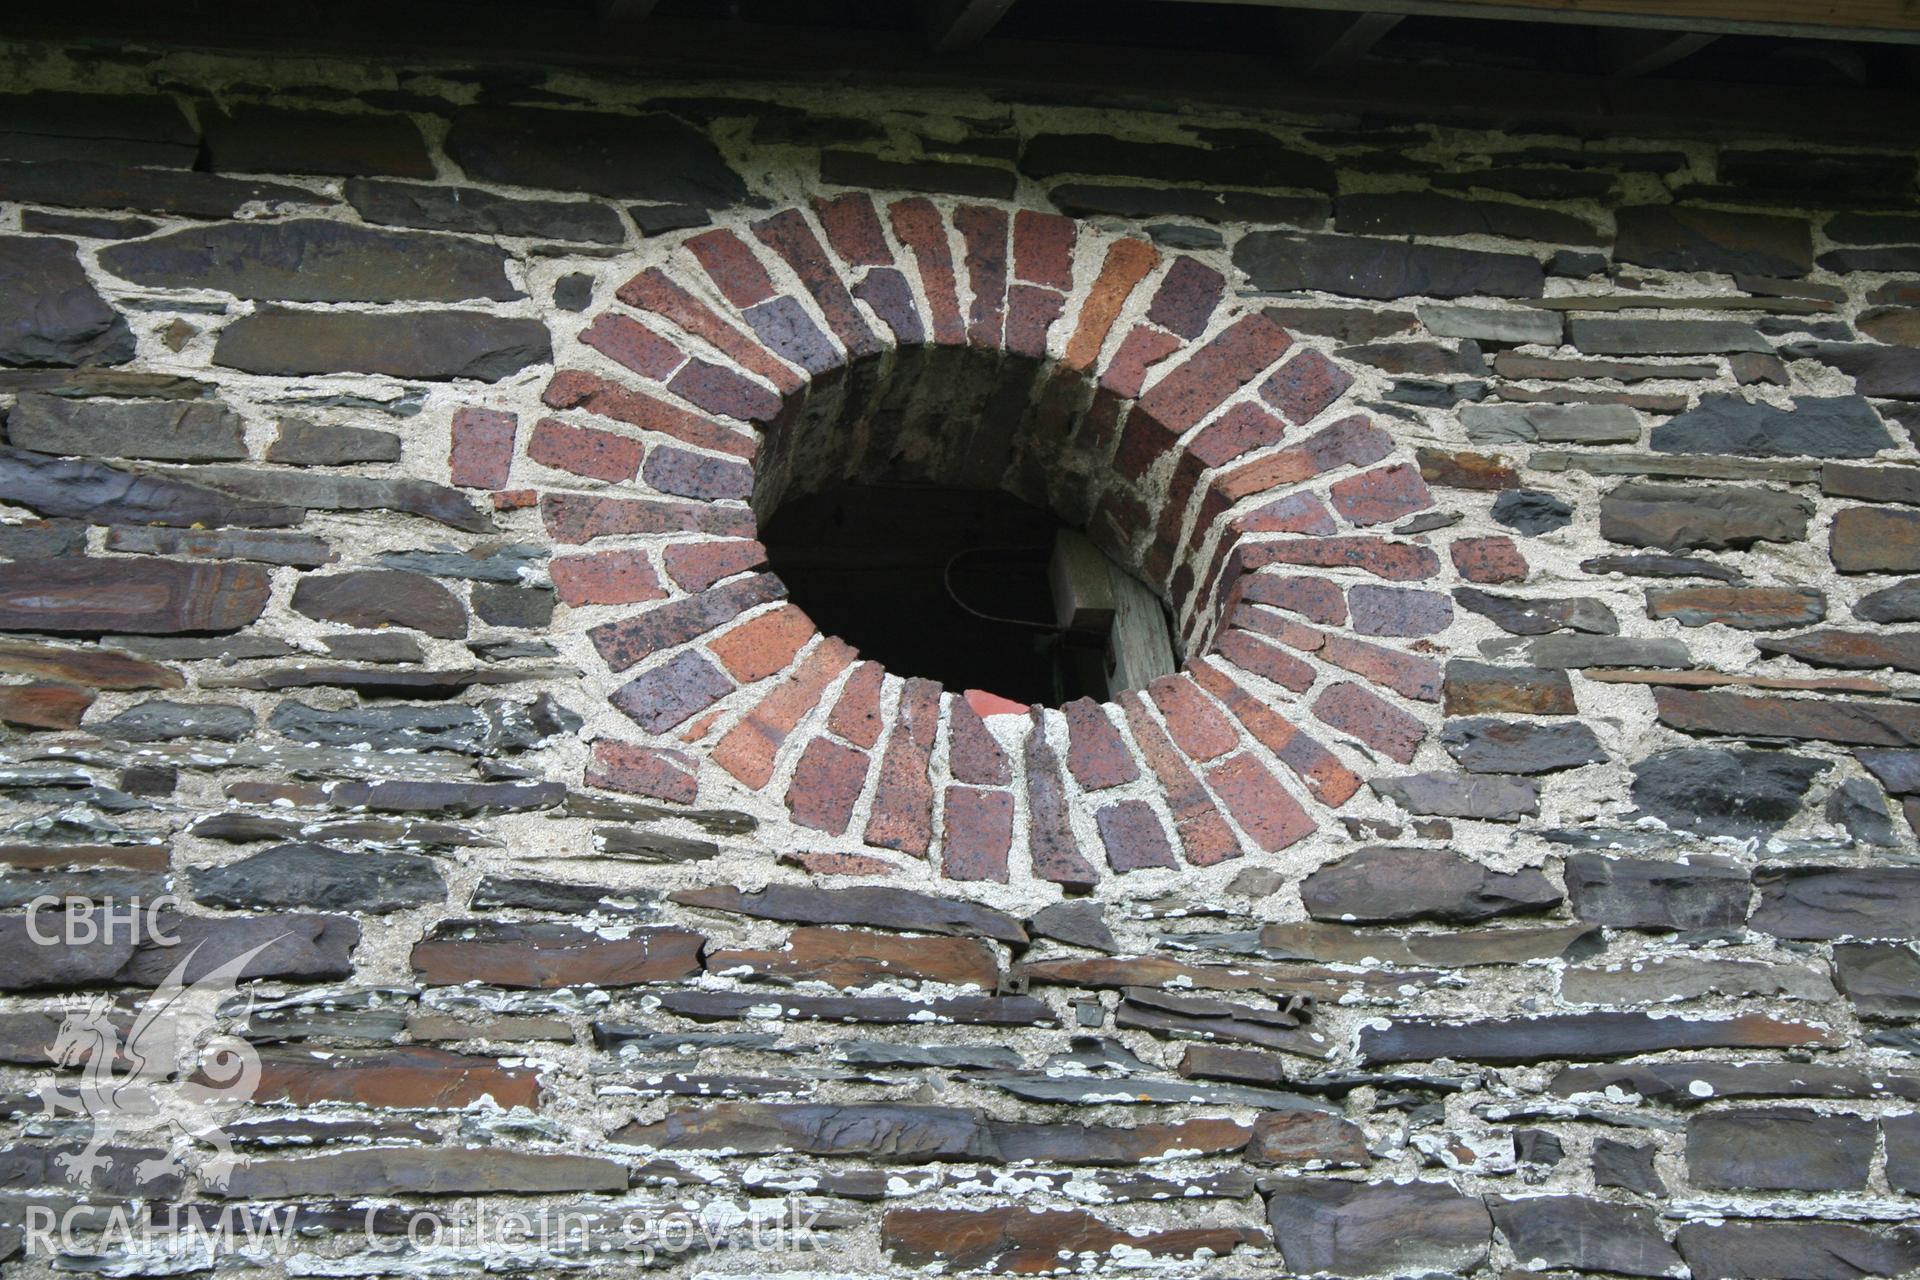 Exterior view of stone wall and window opening supported by engineering brick. Photographic survey of the northern range of cattle-shelters at Tan-y-Graig Farm, Llanfarian, conducted by Geoff Ward and John Wiles, 11th December 2006.